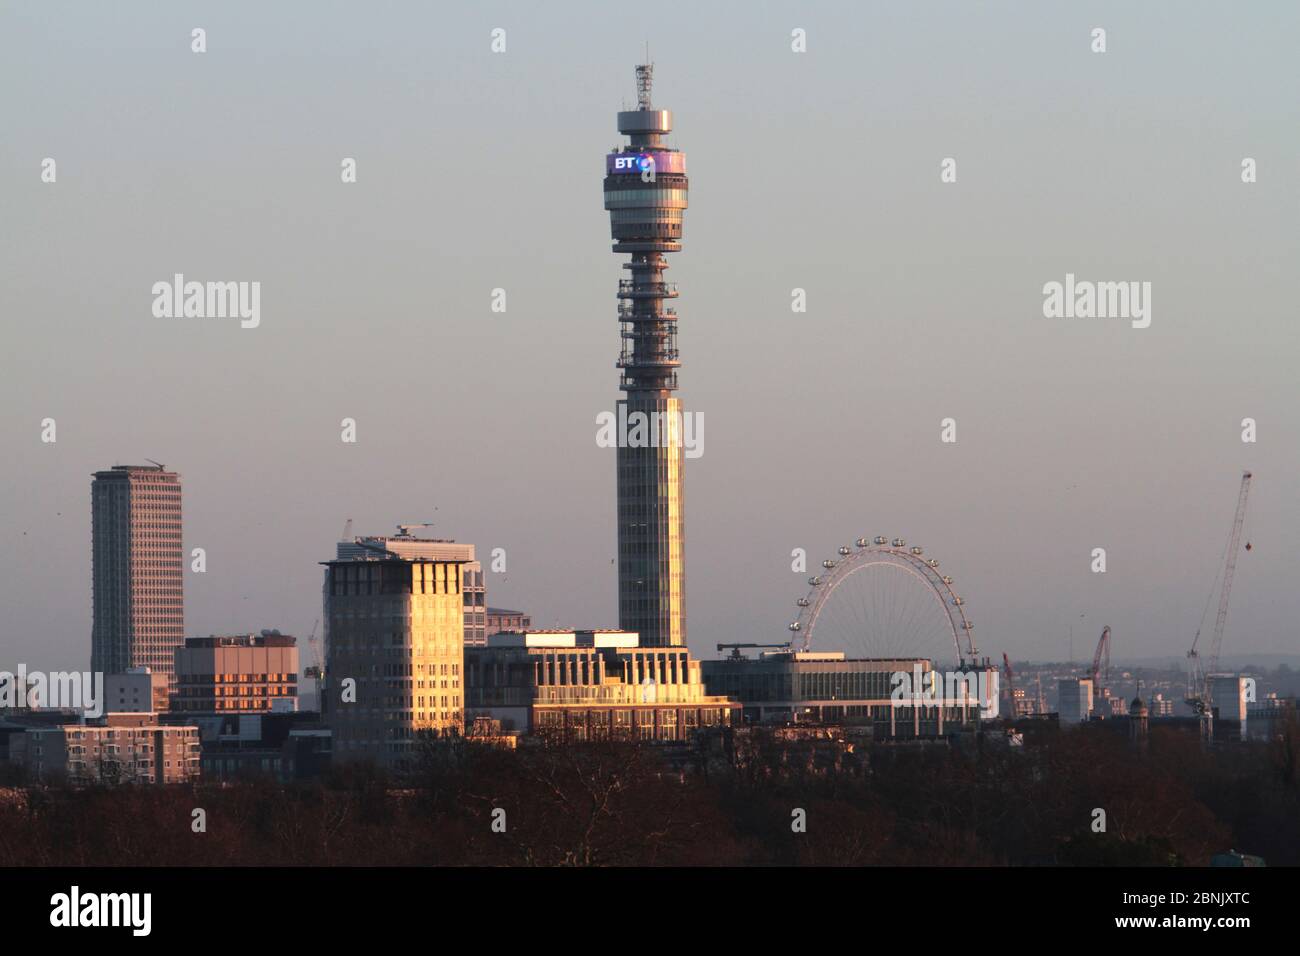 Sunset BT Tower formally known as Post Office Tower and British Telecom Tower, London, England. Stock Photo